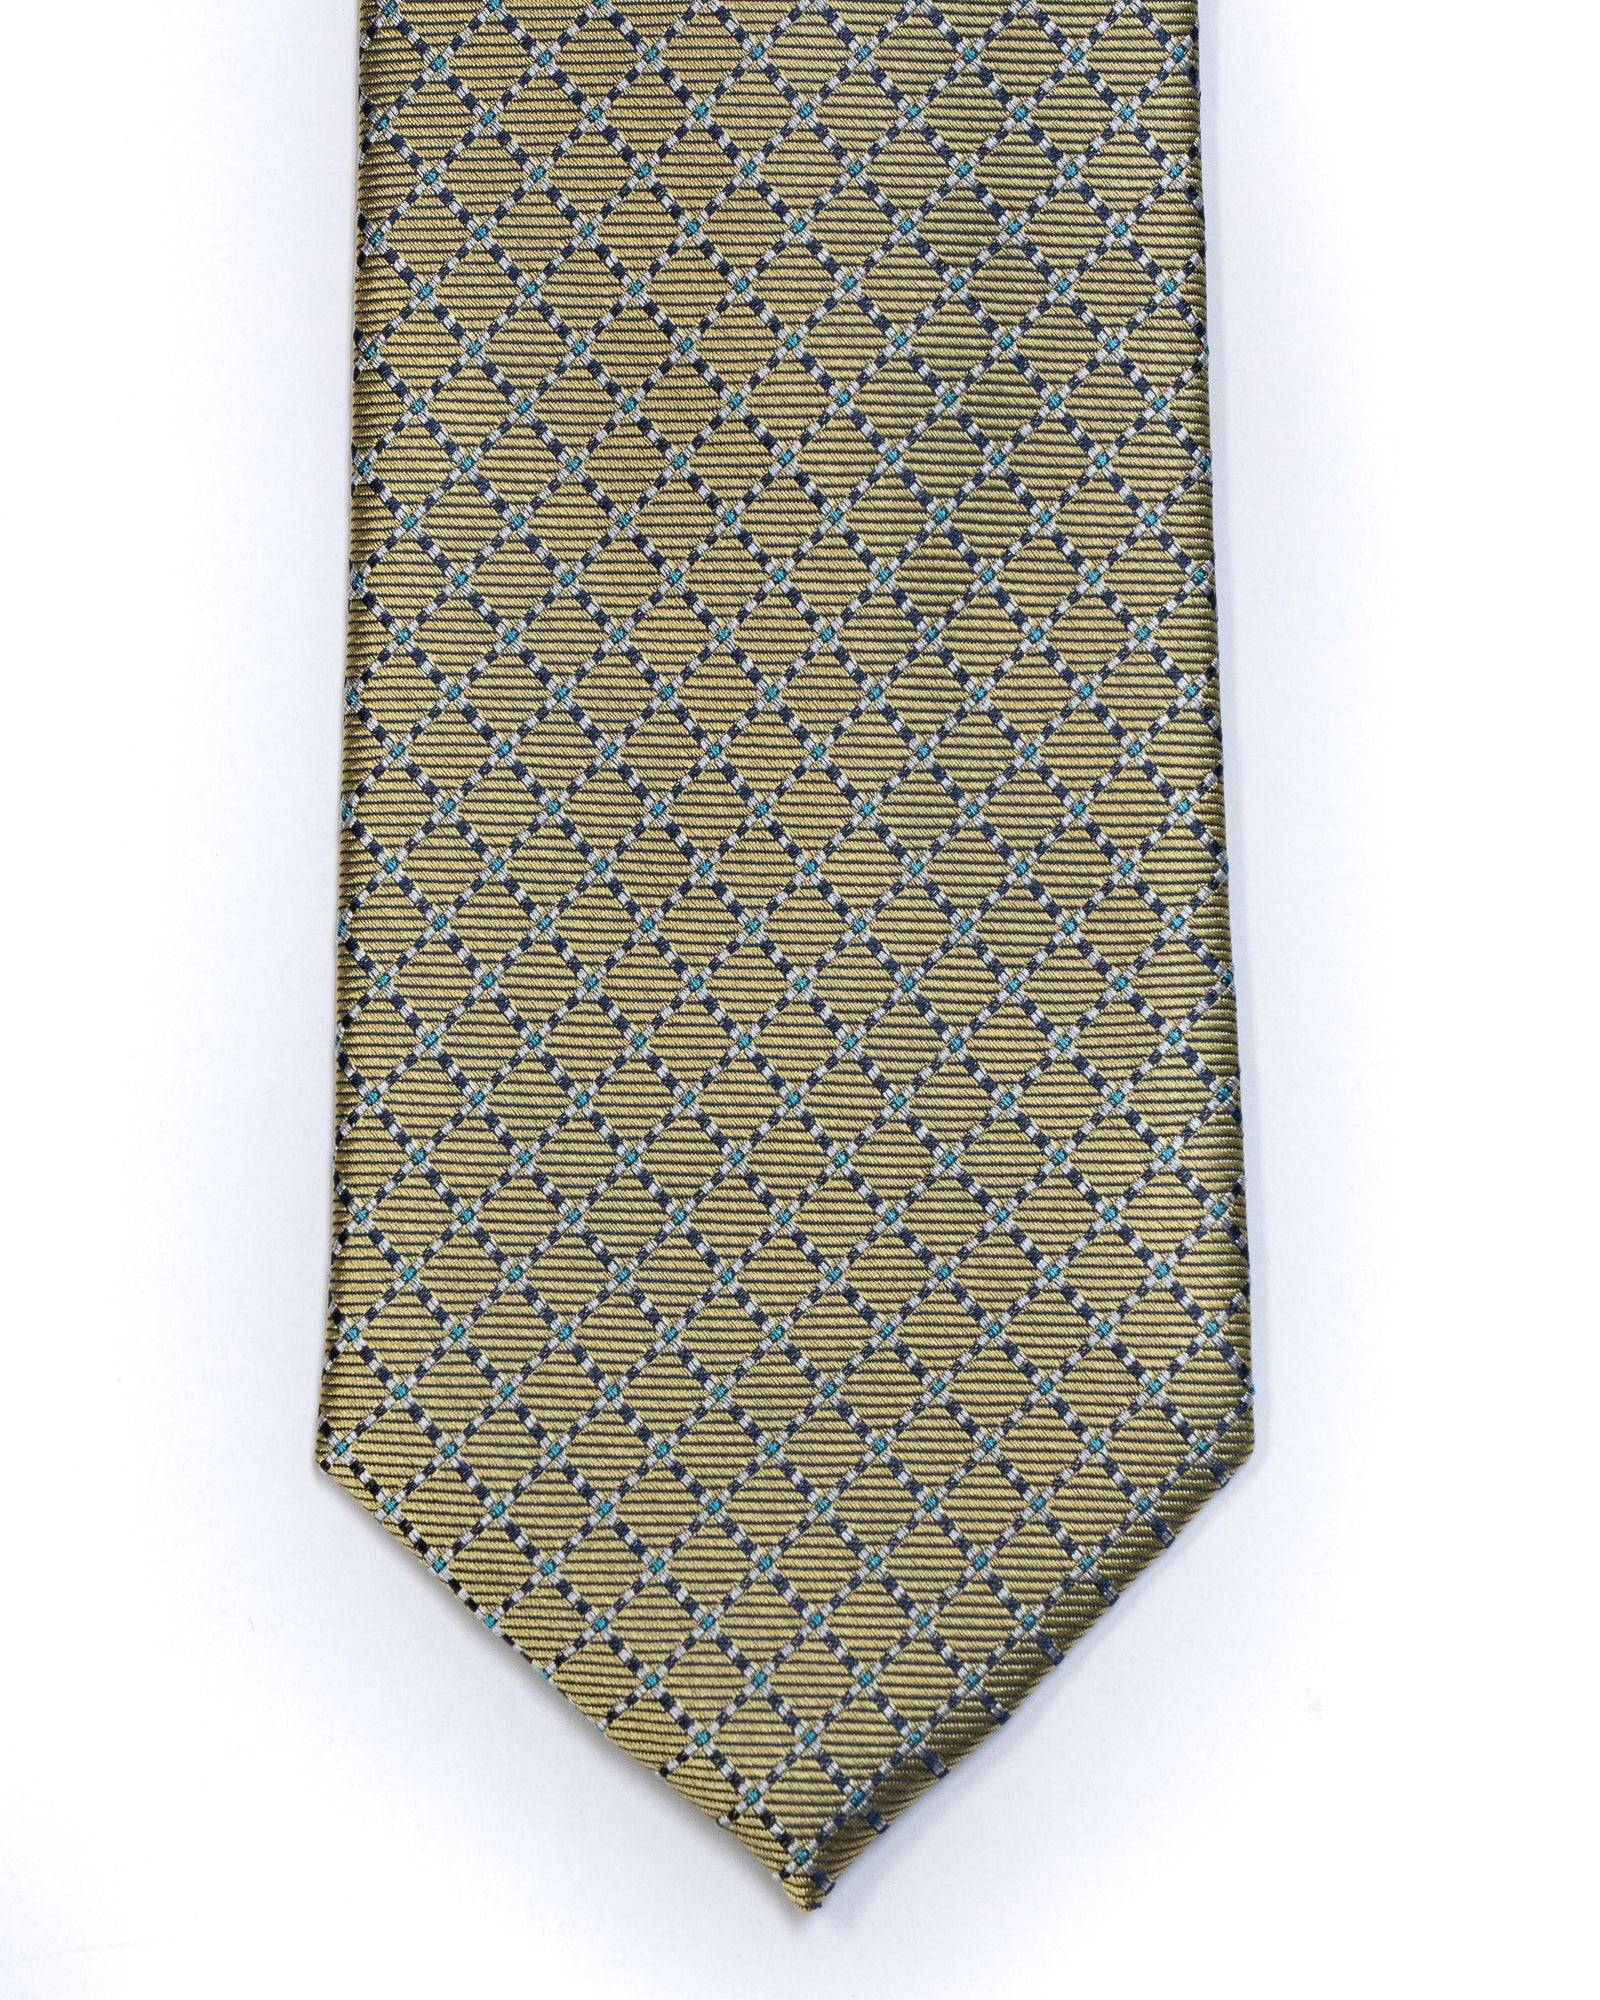 Silk Tie in Yellow With Blue Foulard Print - Rainwater's Men's Clothing and Tuxedo Rental